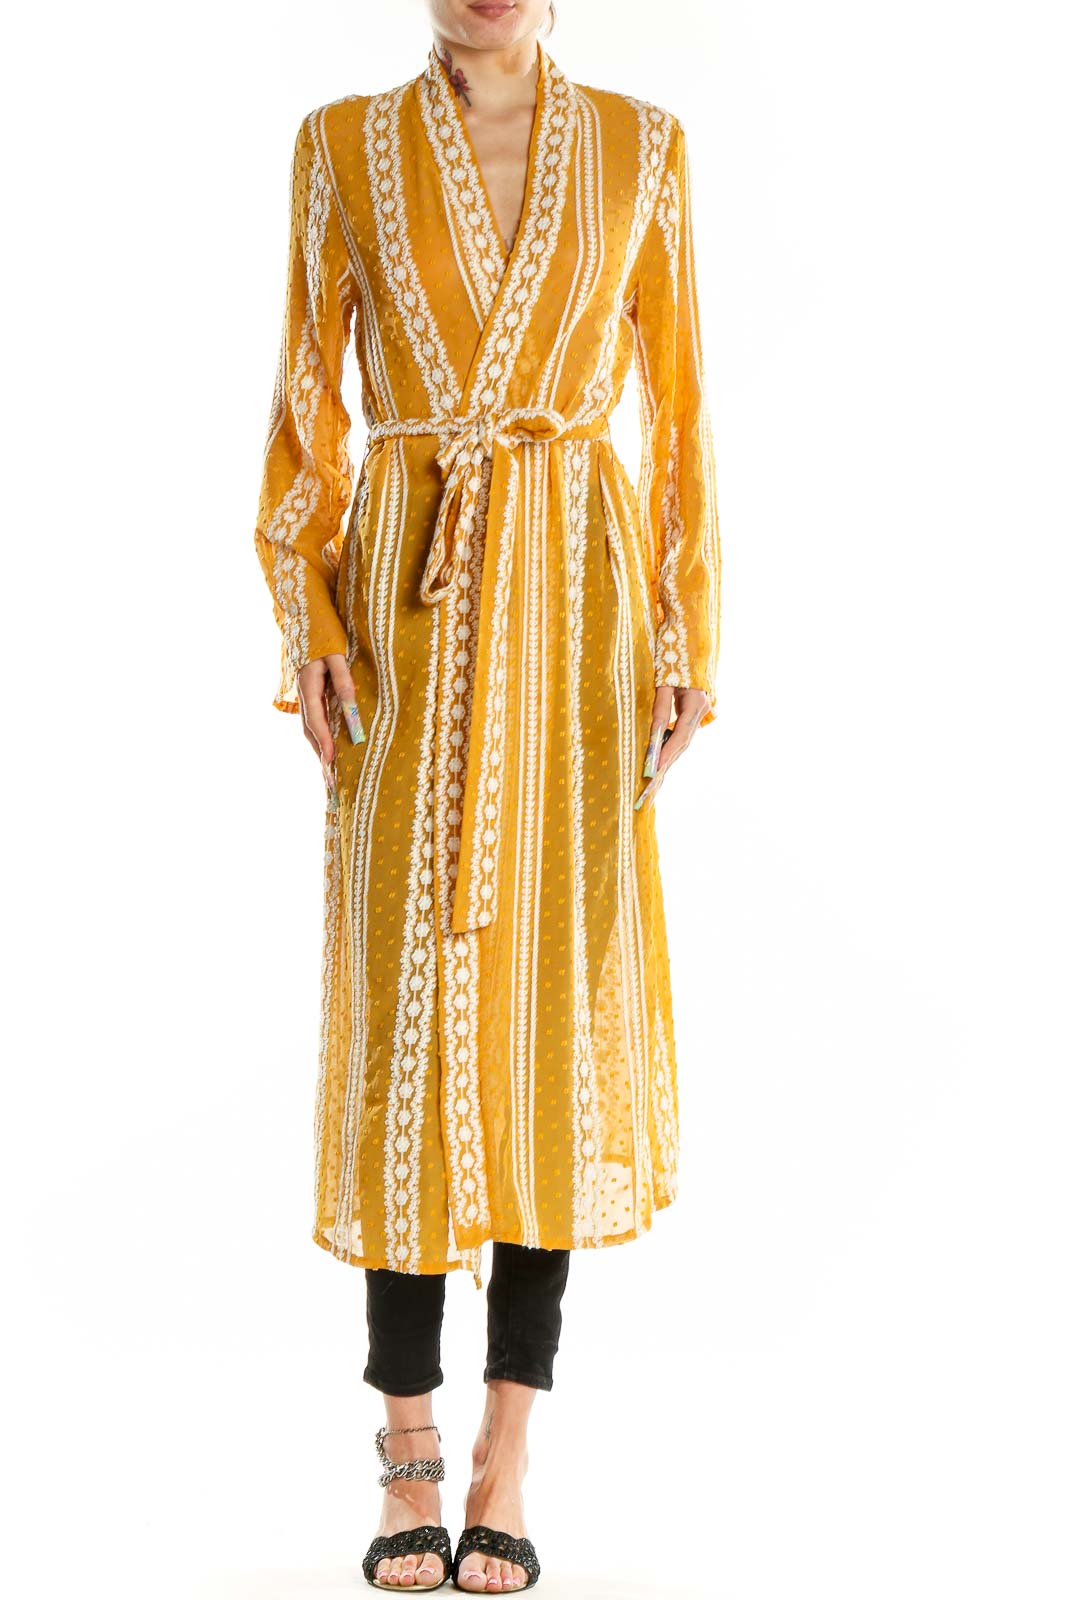 Yellow Embroidered Sheer Wrap Dress Front